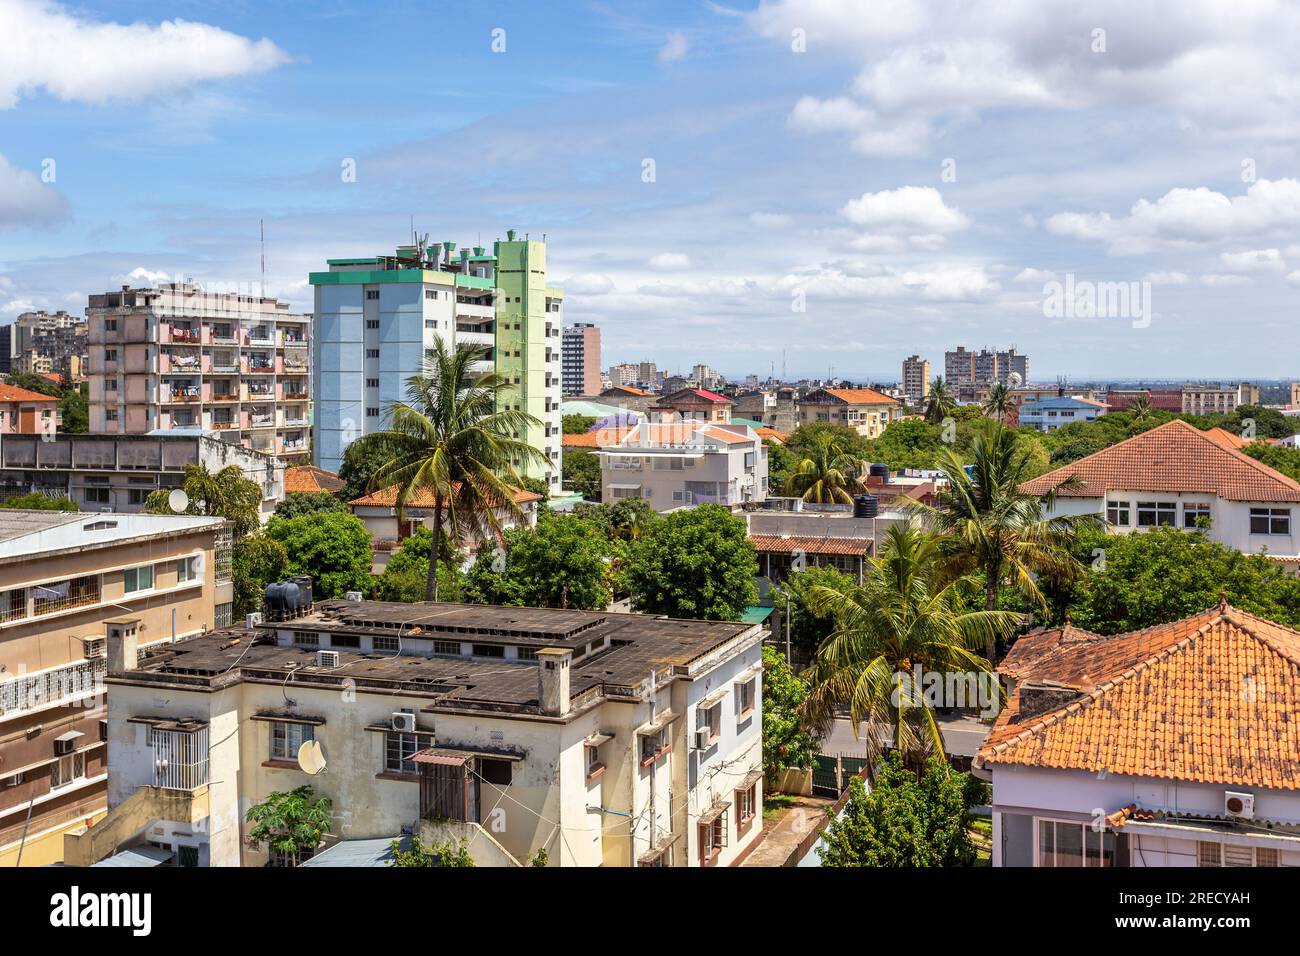 View over houses and apartments in the central suburbs of Maputo, Mozambique Stock Photo